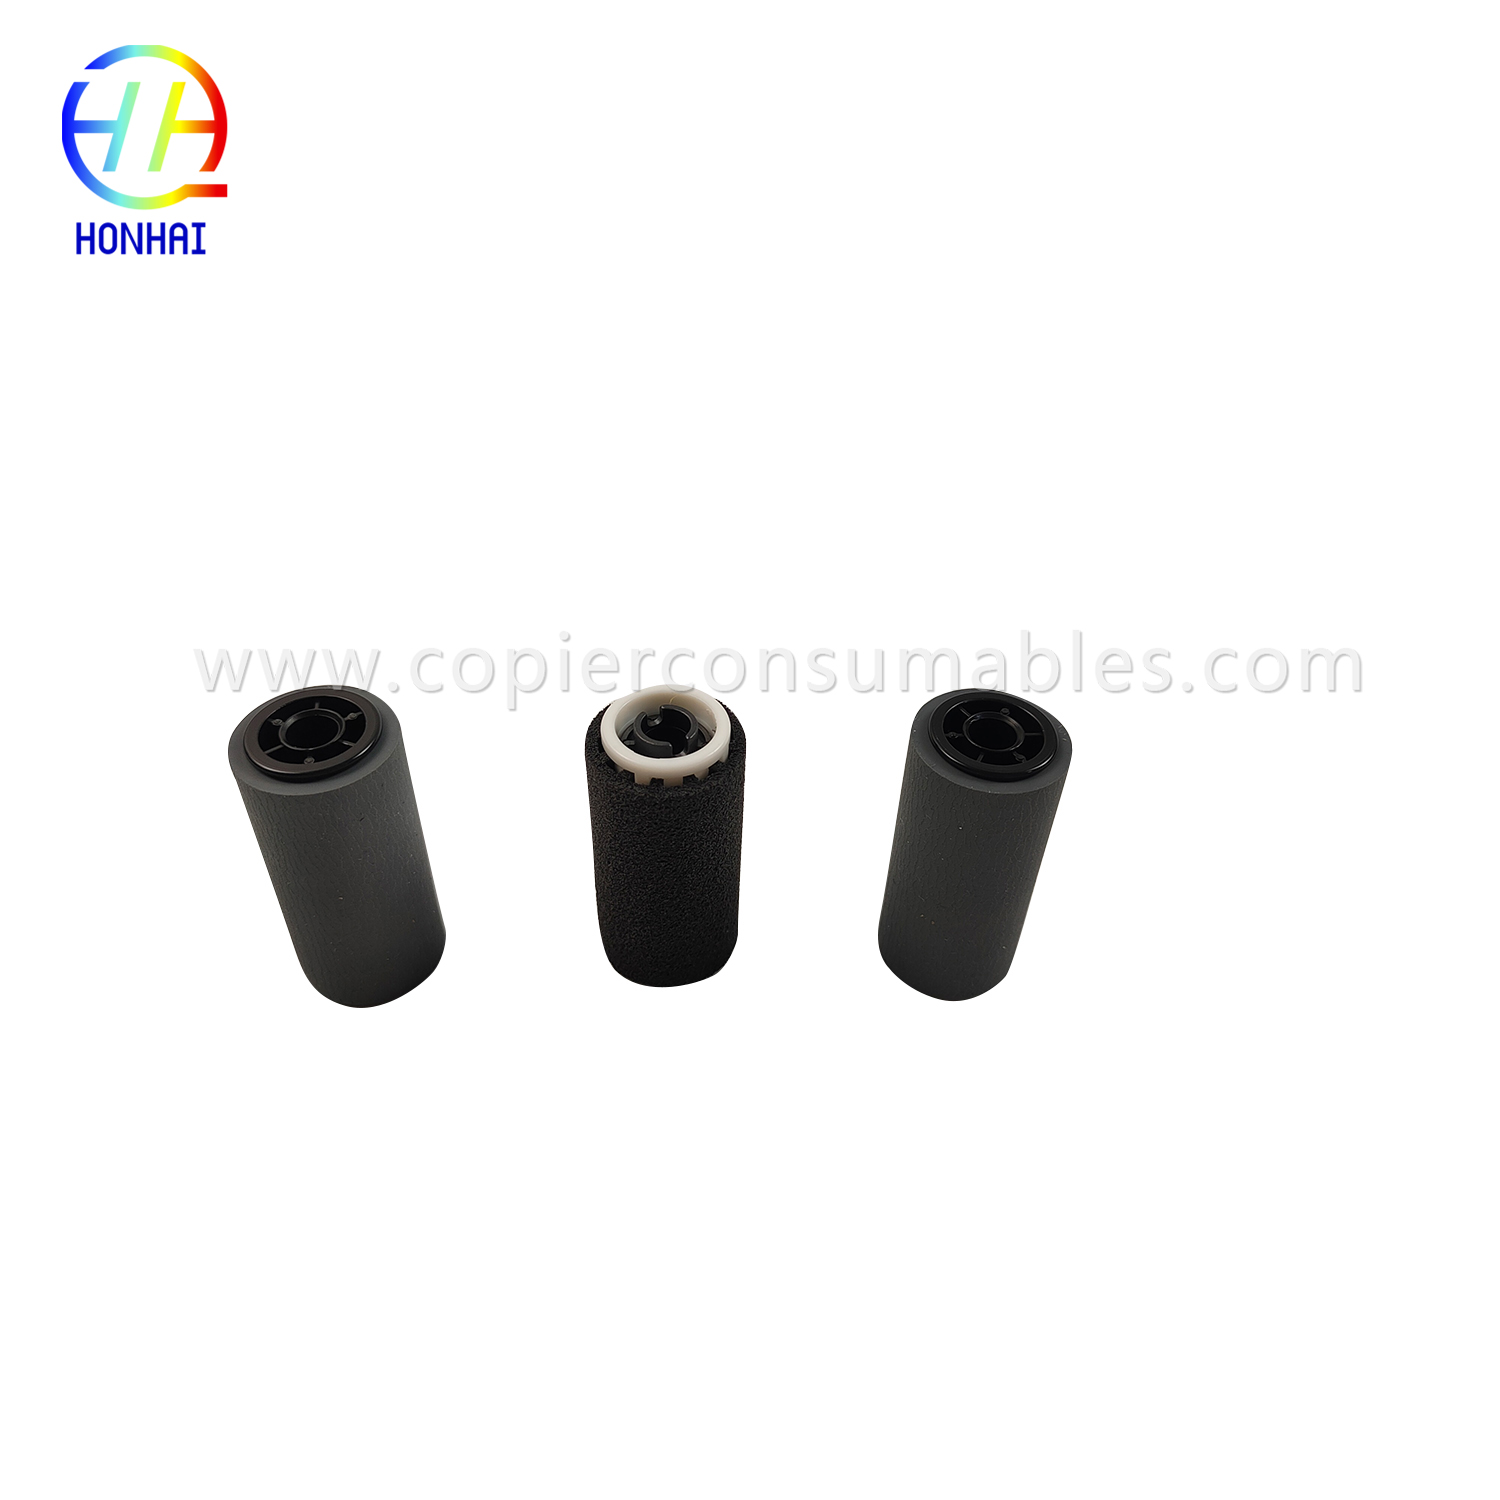 Feed Roller for Xerox C123 5225 Families 7328 Family 7132 Style 7425 7525 7830 (059K31270) 拷贝